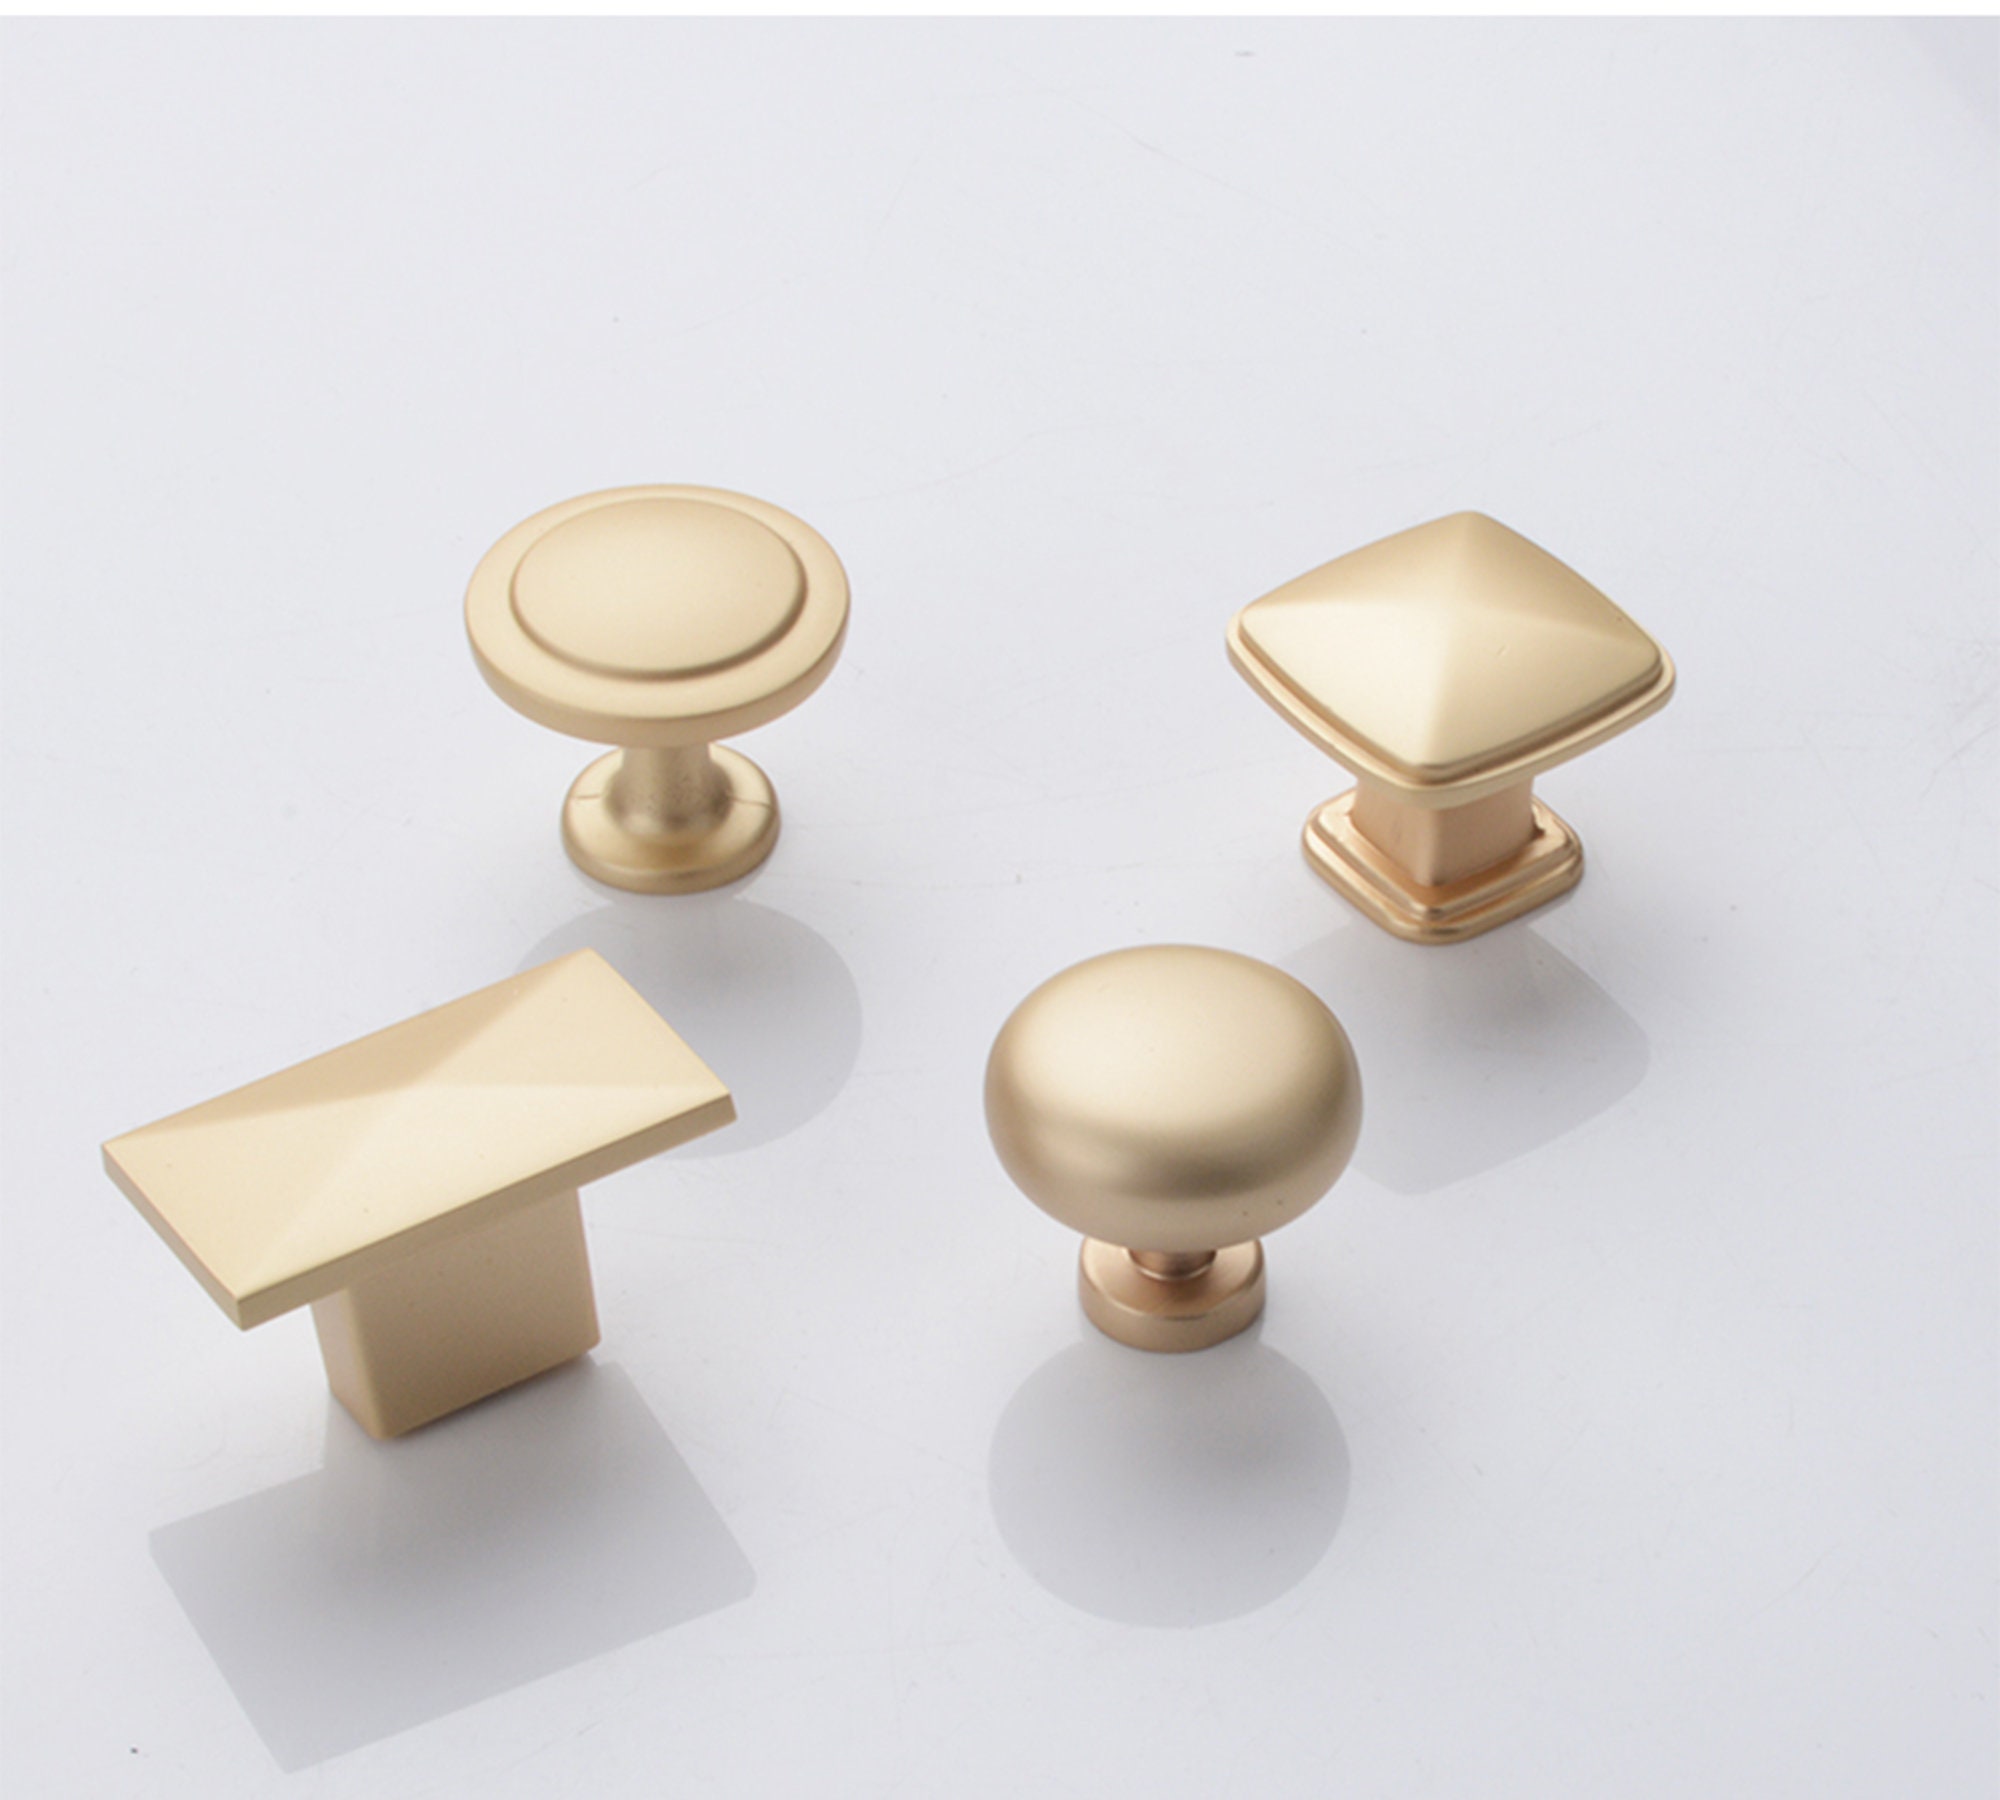 High Polished Luxury Gold Cabinet Pulls, Cabinet Knobs, Drawer Pulls, Drawer  Knobs, Pulls, Knobs for Homes, Offices, Cafes, Restaurants Etc. -   Canada